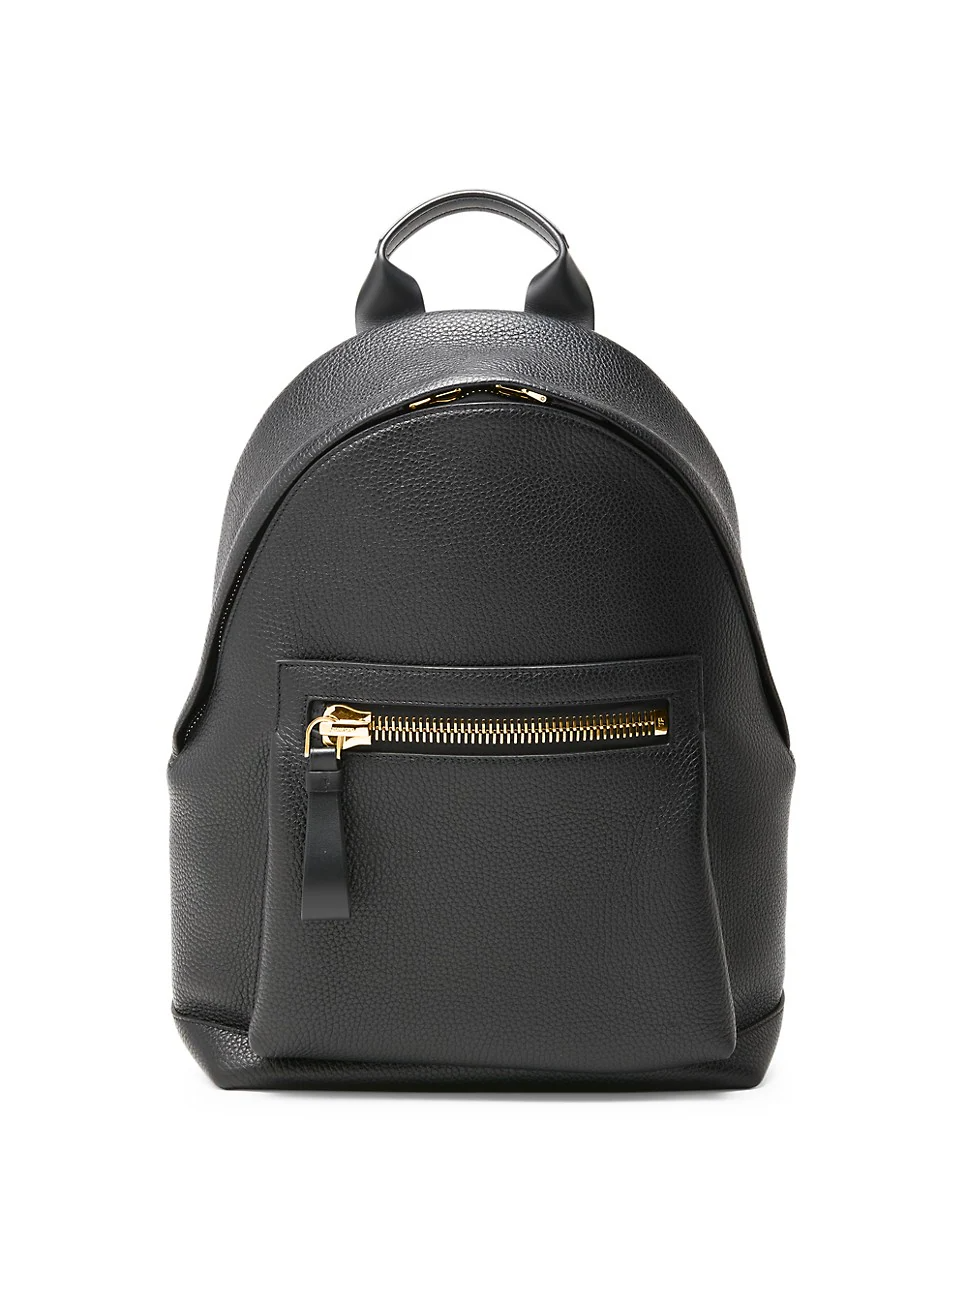 Saks Fifth Avenue Tom Ford Buckley Leather Backpack